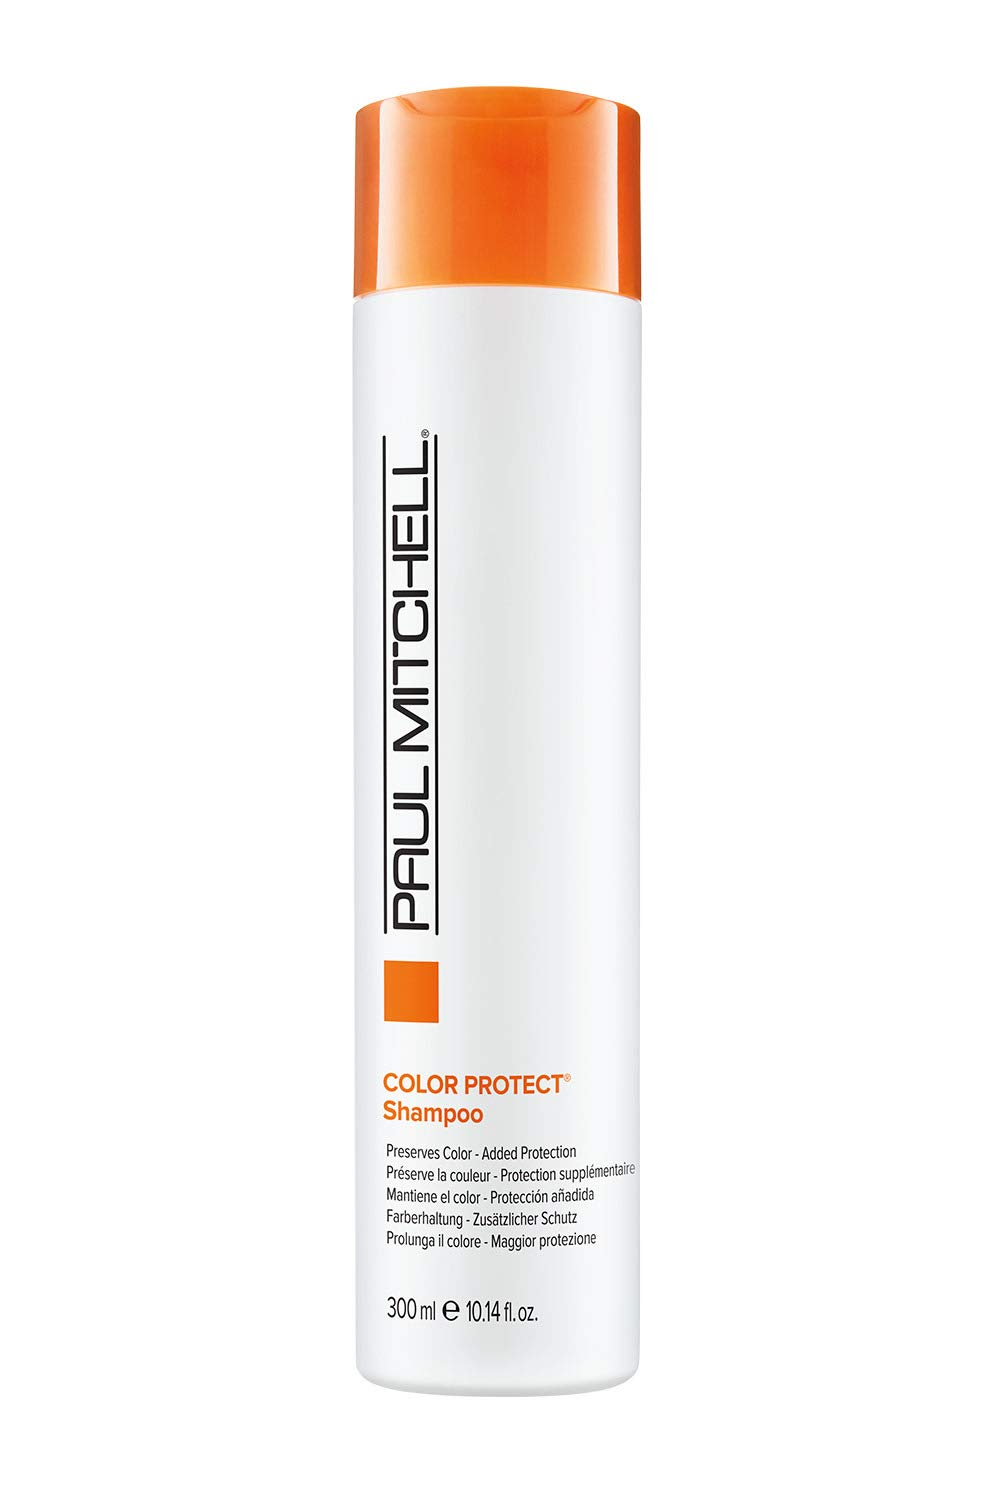 Paul Mitchell Color Protect® Shampoo 300ml